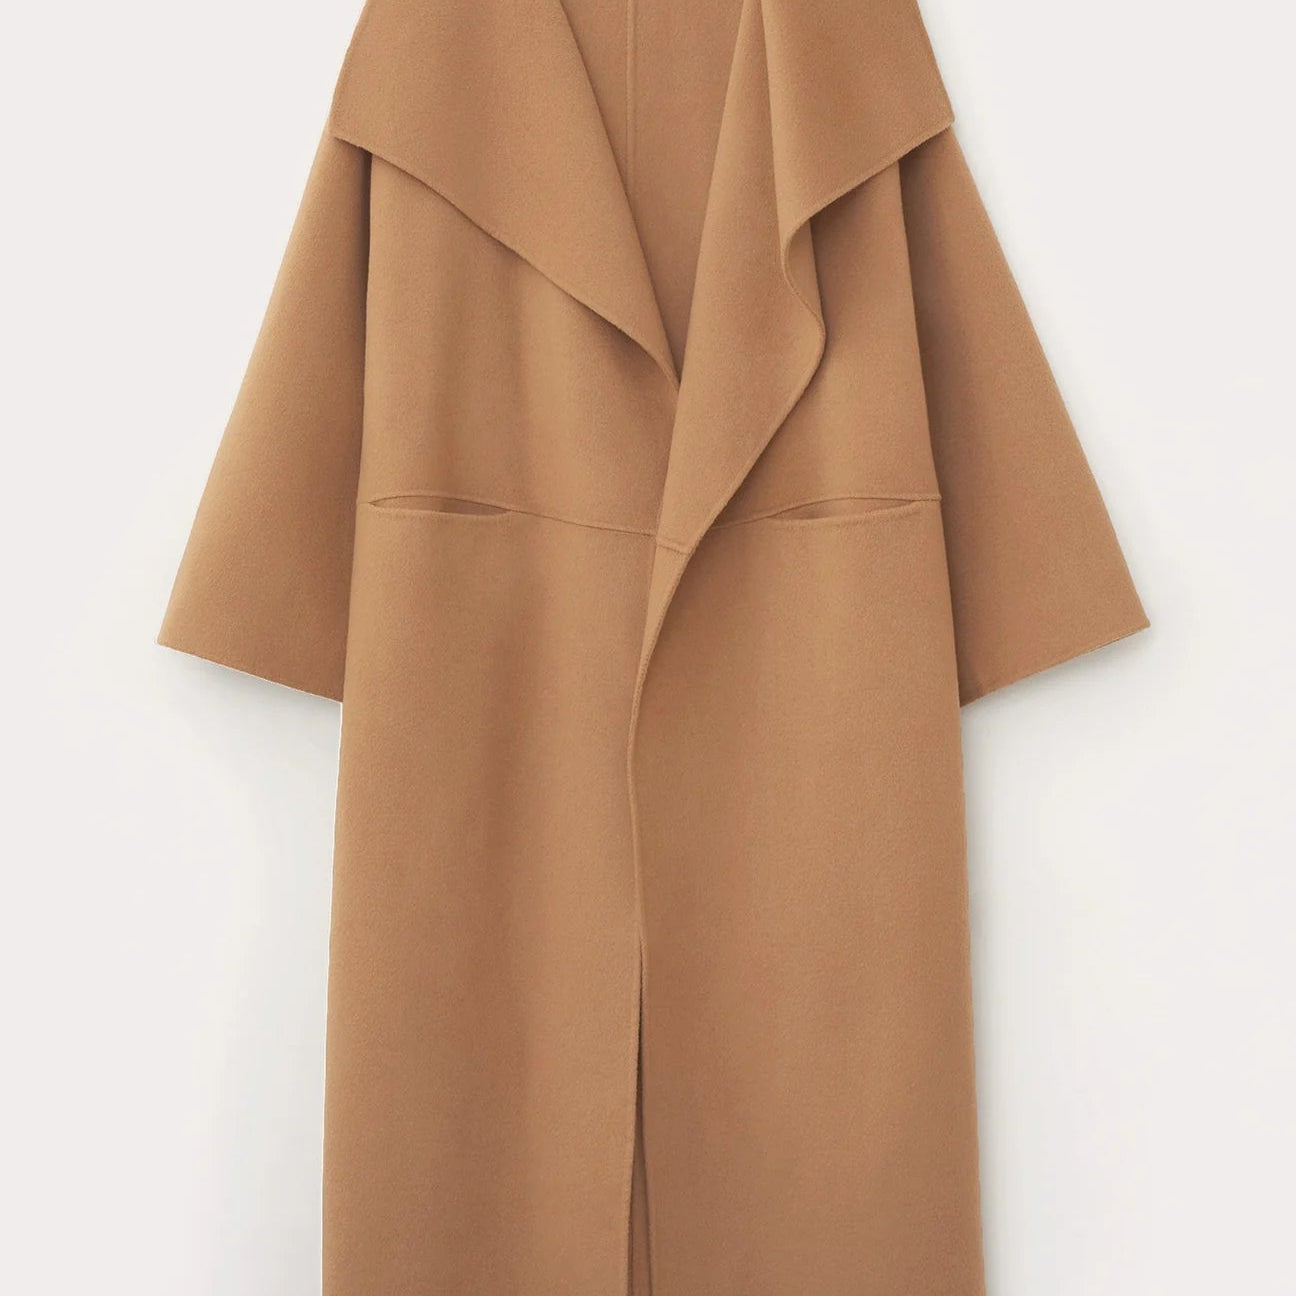 Signature wool cashmere coat camel by Toteme - The Line